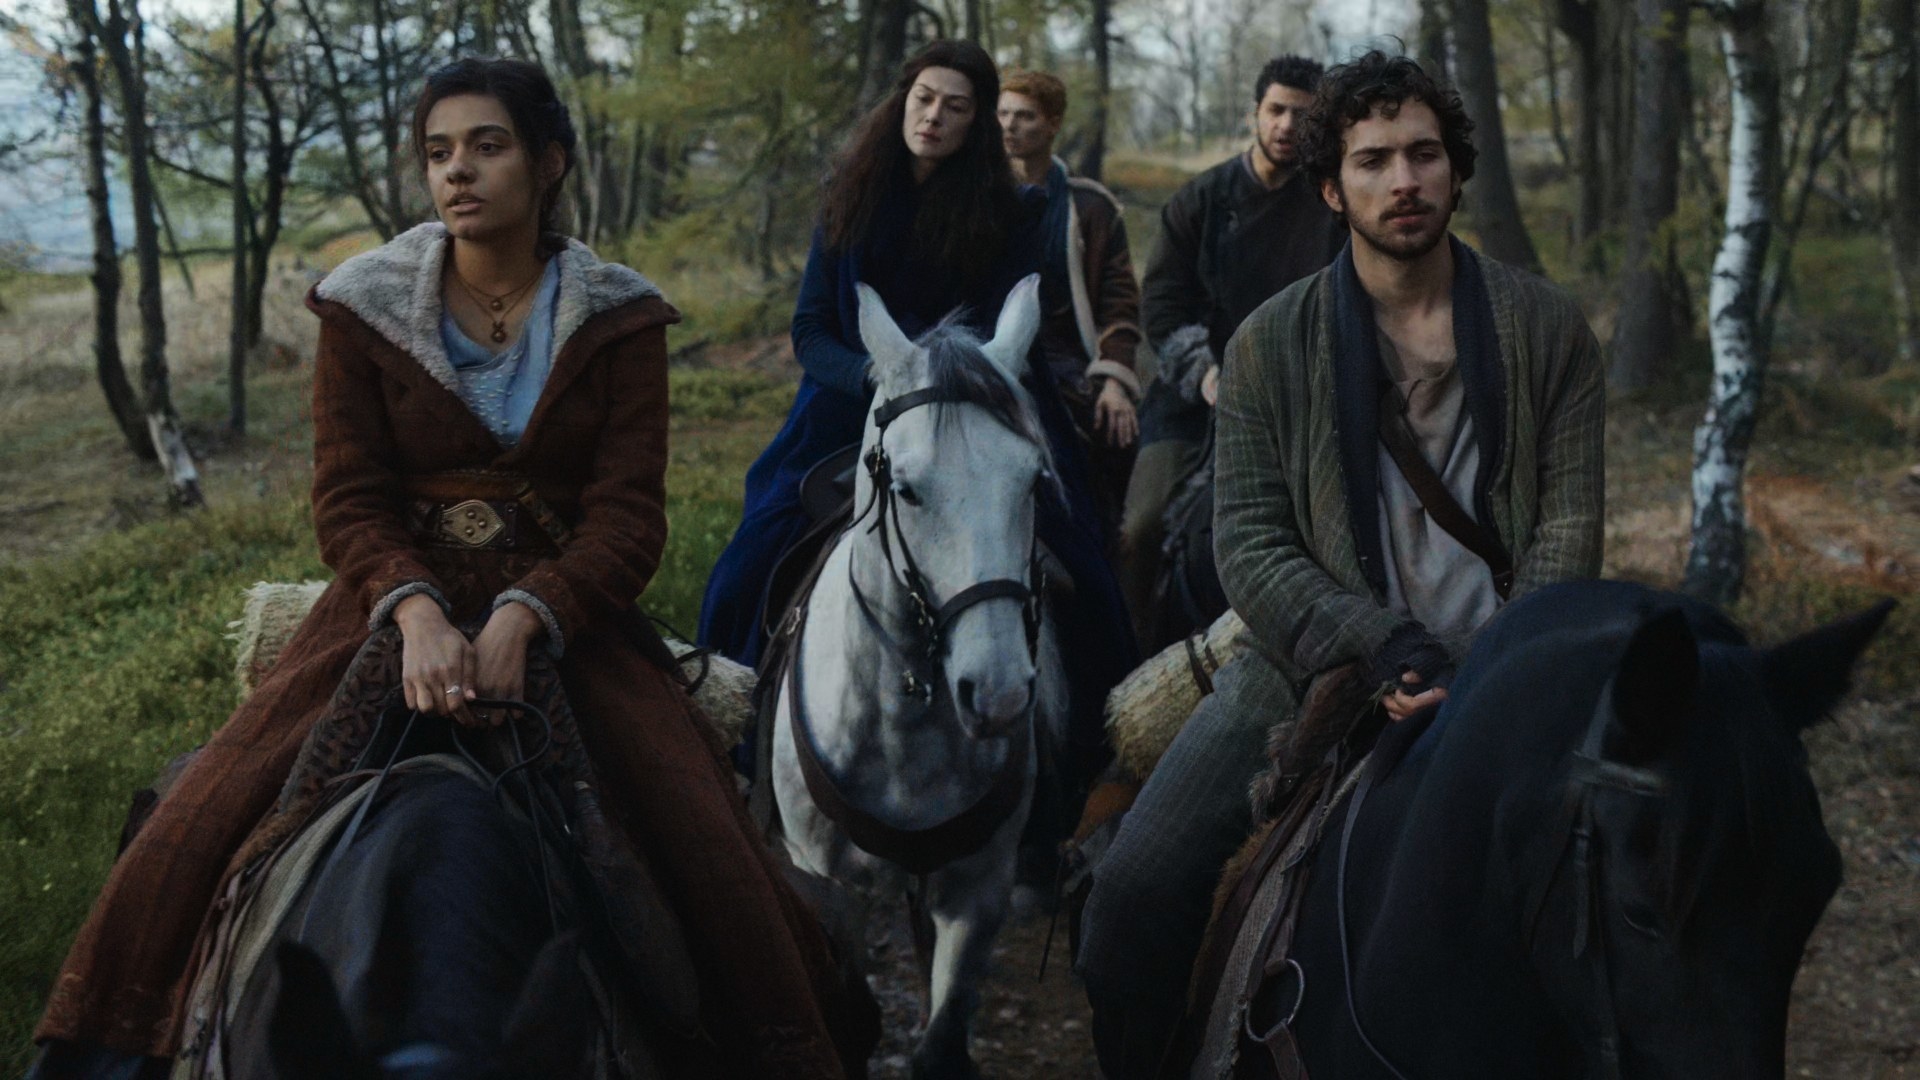 Rand, Perrin, Mat, and Egwene are all riding their horses in the wilderness, surrounding Moiraine on her white horse, Aldieb